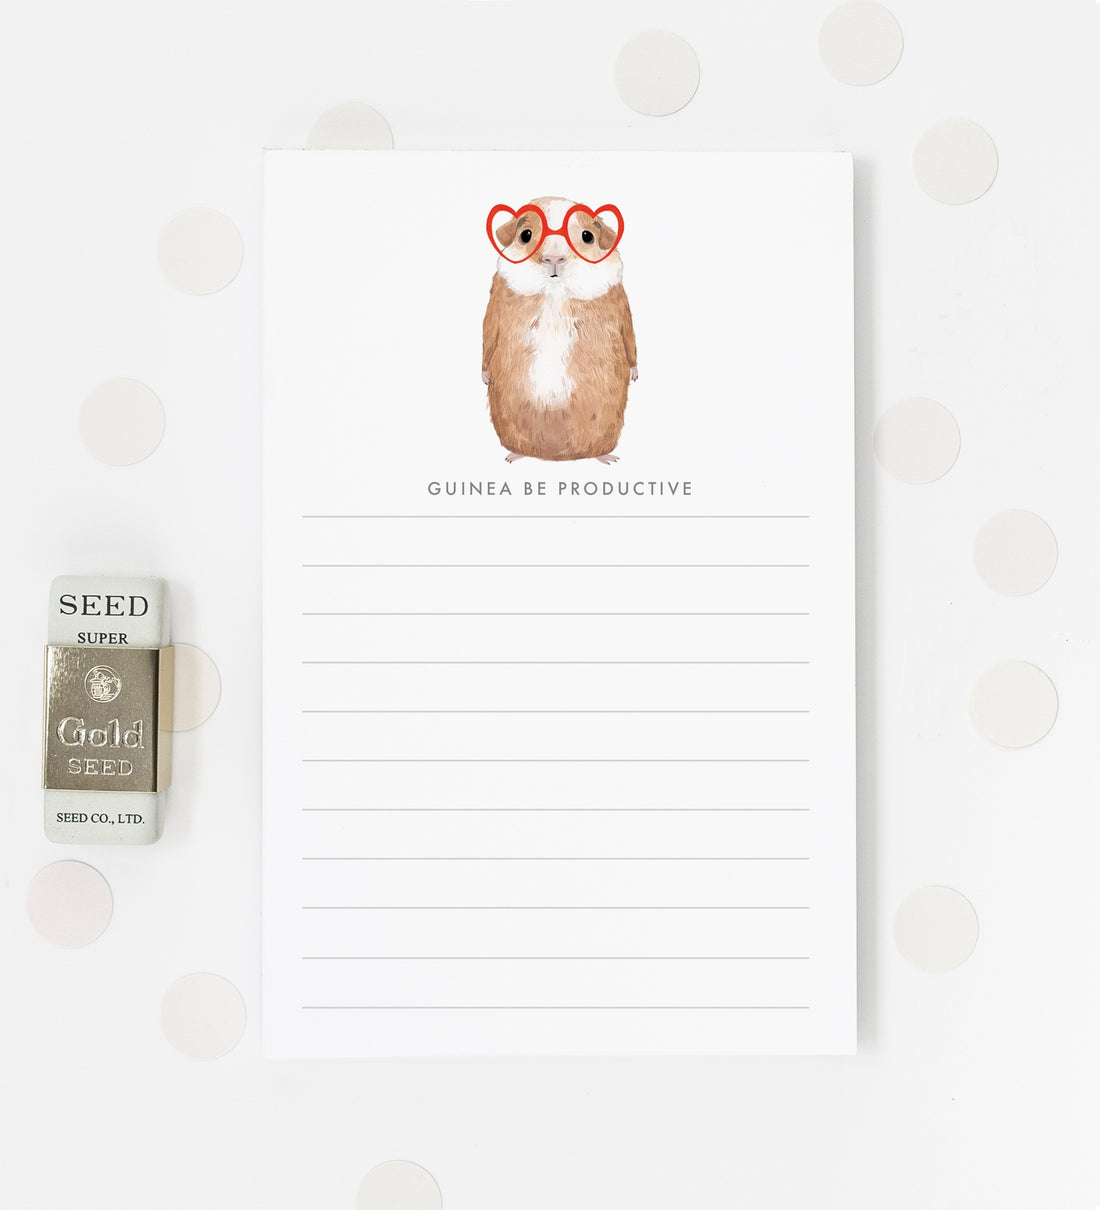 A Dear Hancock Guinea Be Productive Notepad with a Guinea pig in heart-shaped glasses and text that reads &quot;Guinea Be Productive&quot;.